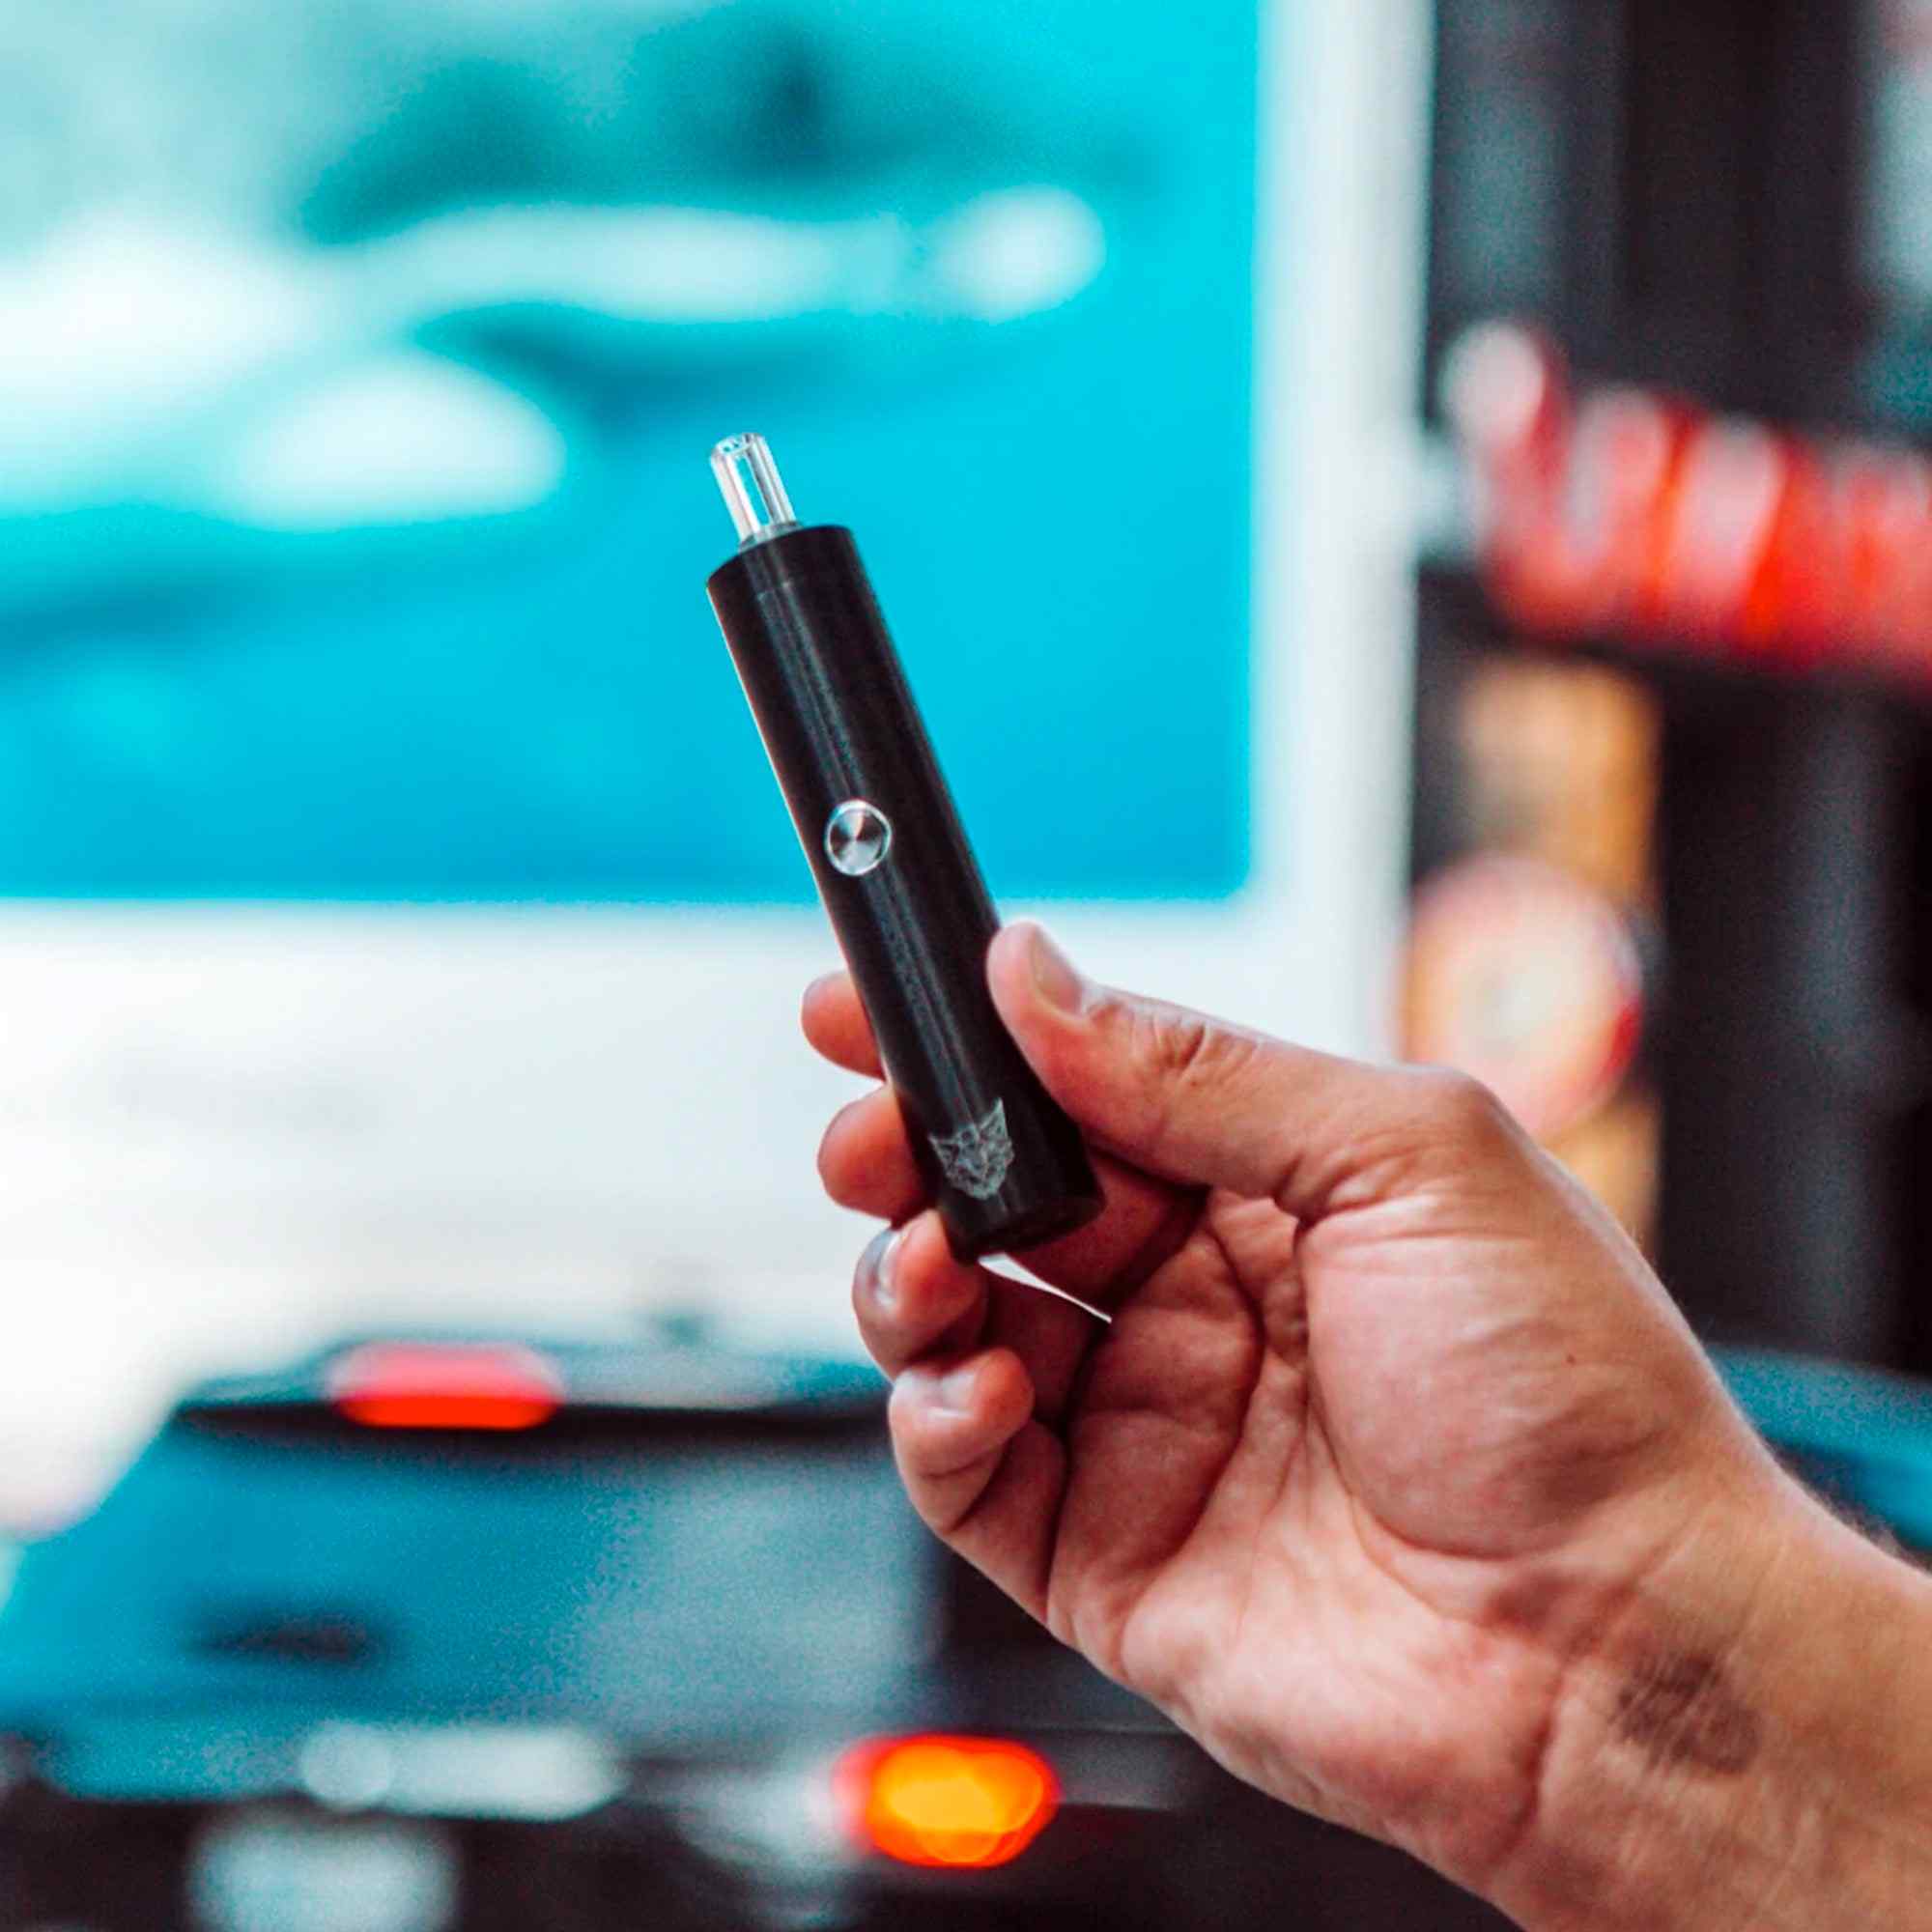 Linx Eden Secures Title of “Best Dry Herb Vaporizer Under $100” By Top Industry Reviewers